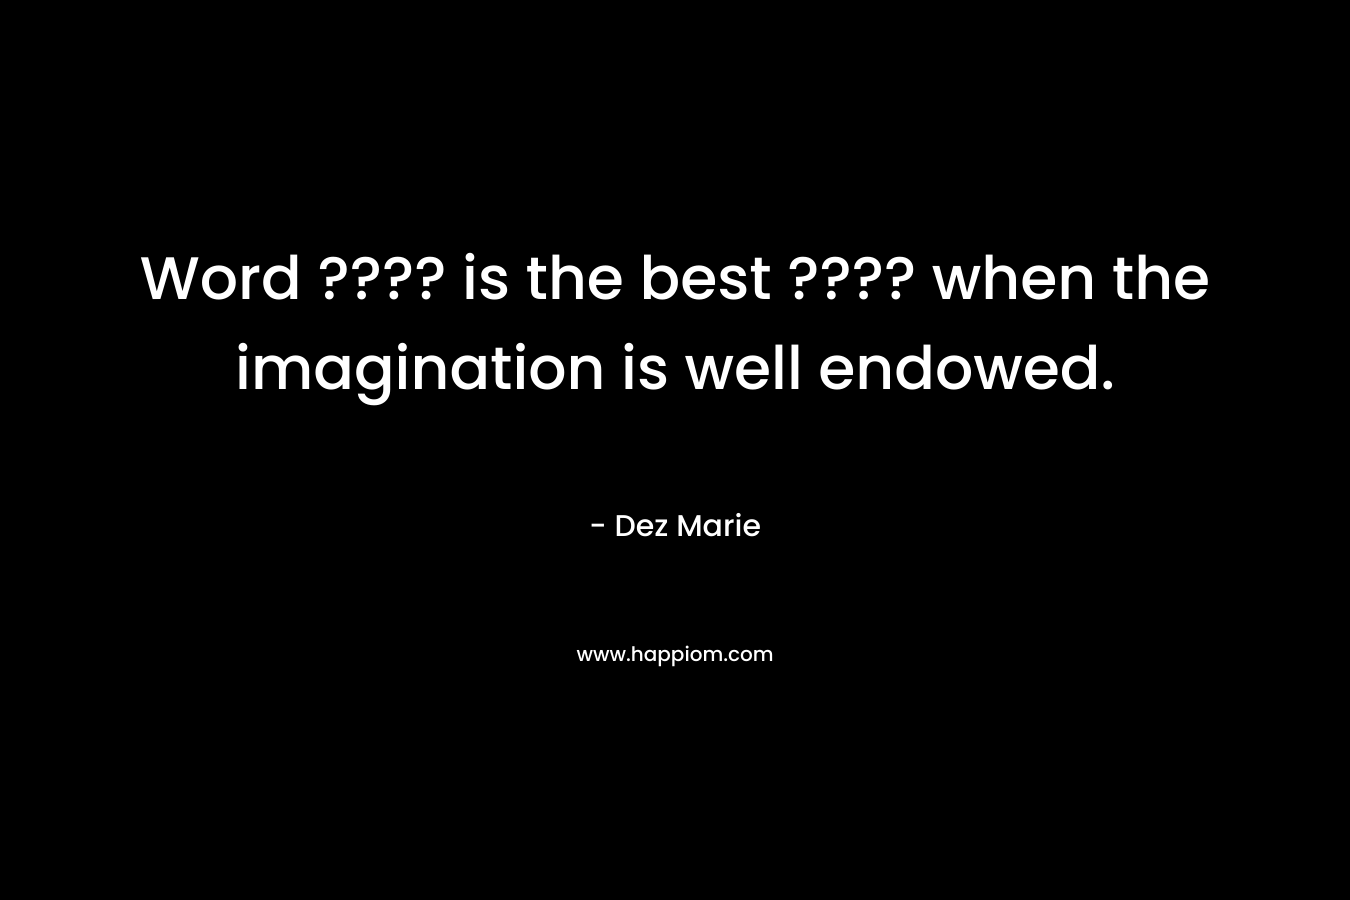 Word ???? is the best ???? when the imagination is well endowed. – Dez Marie